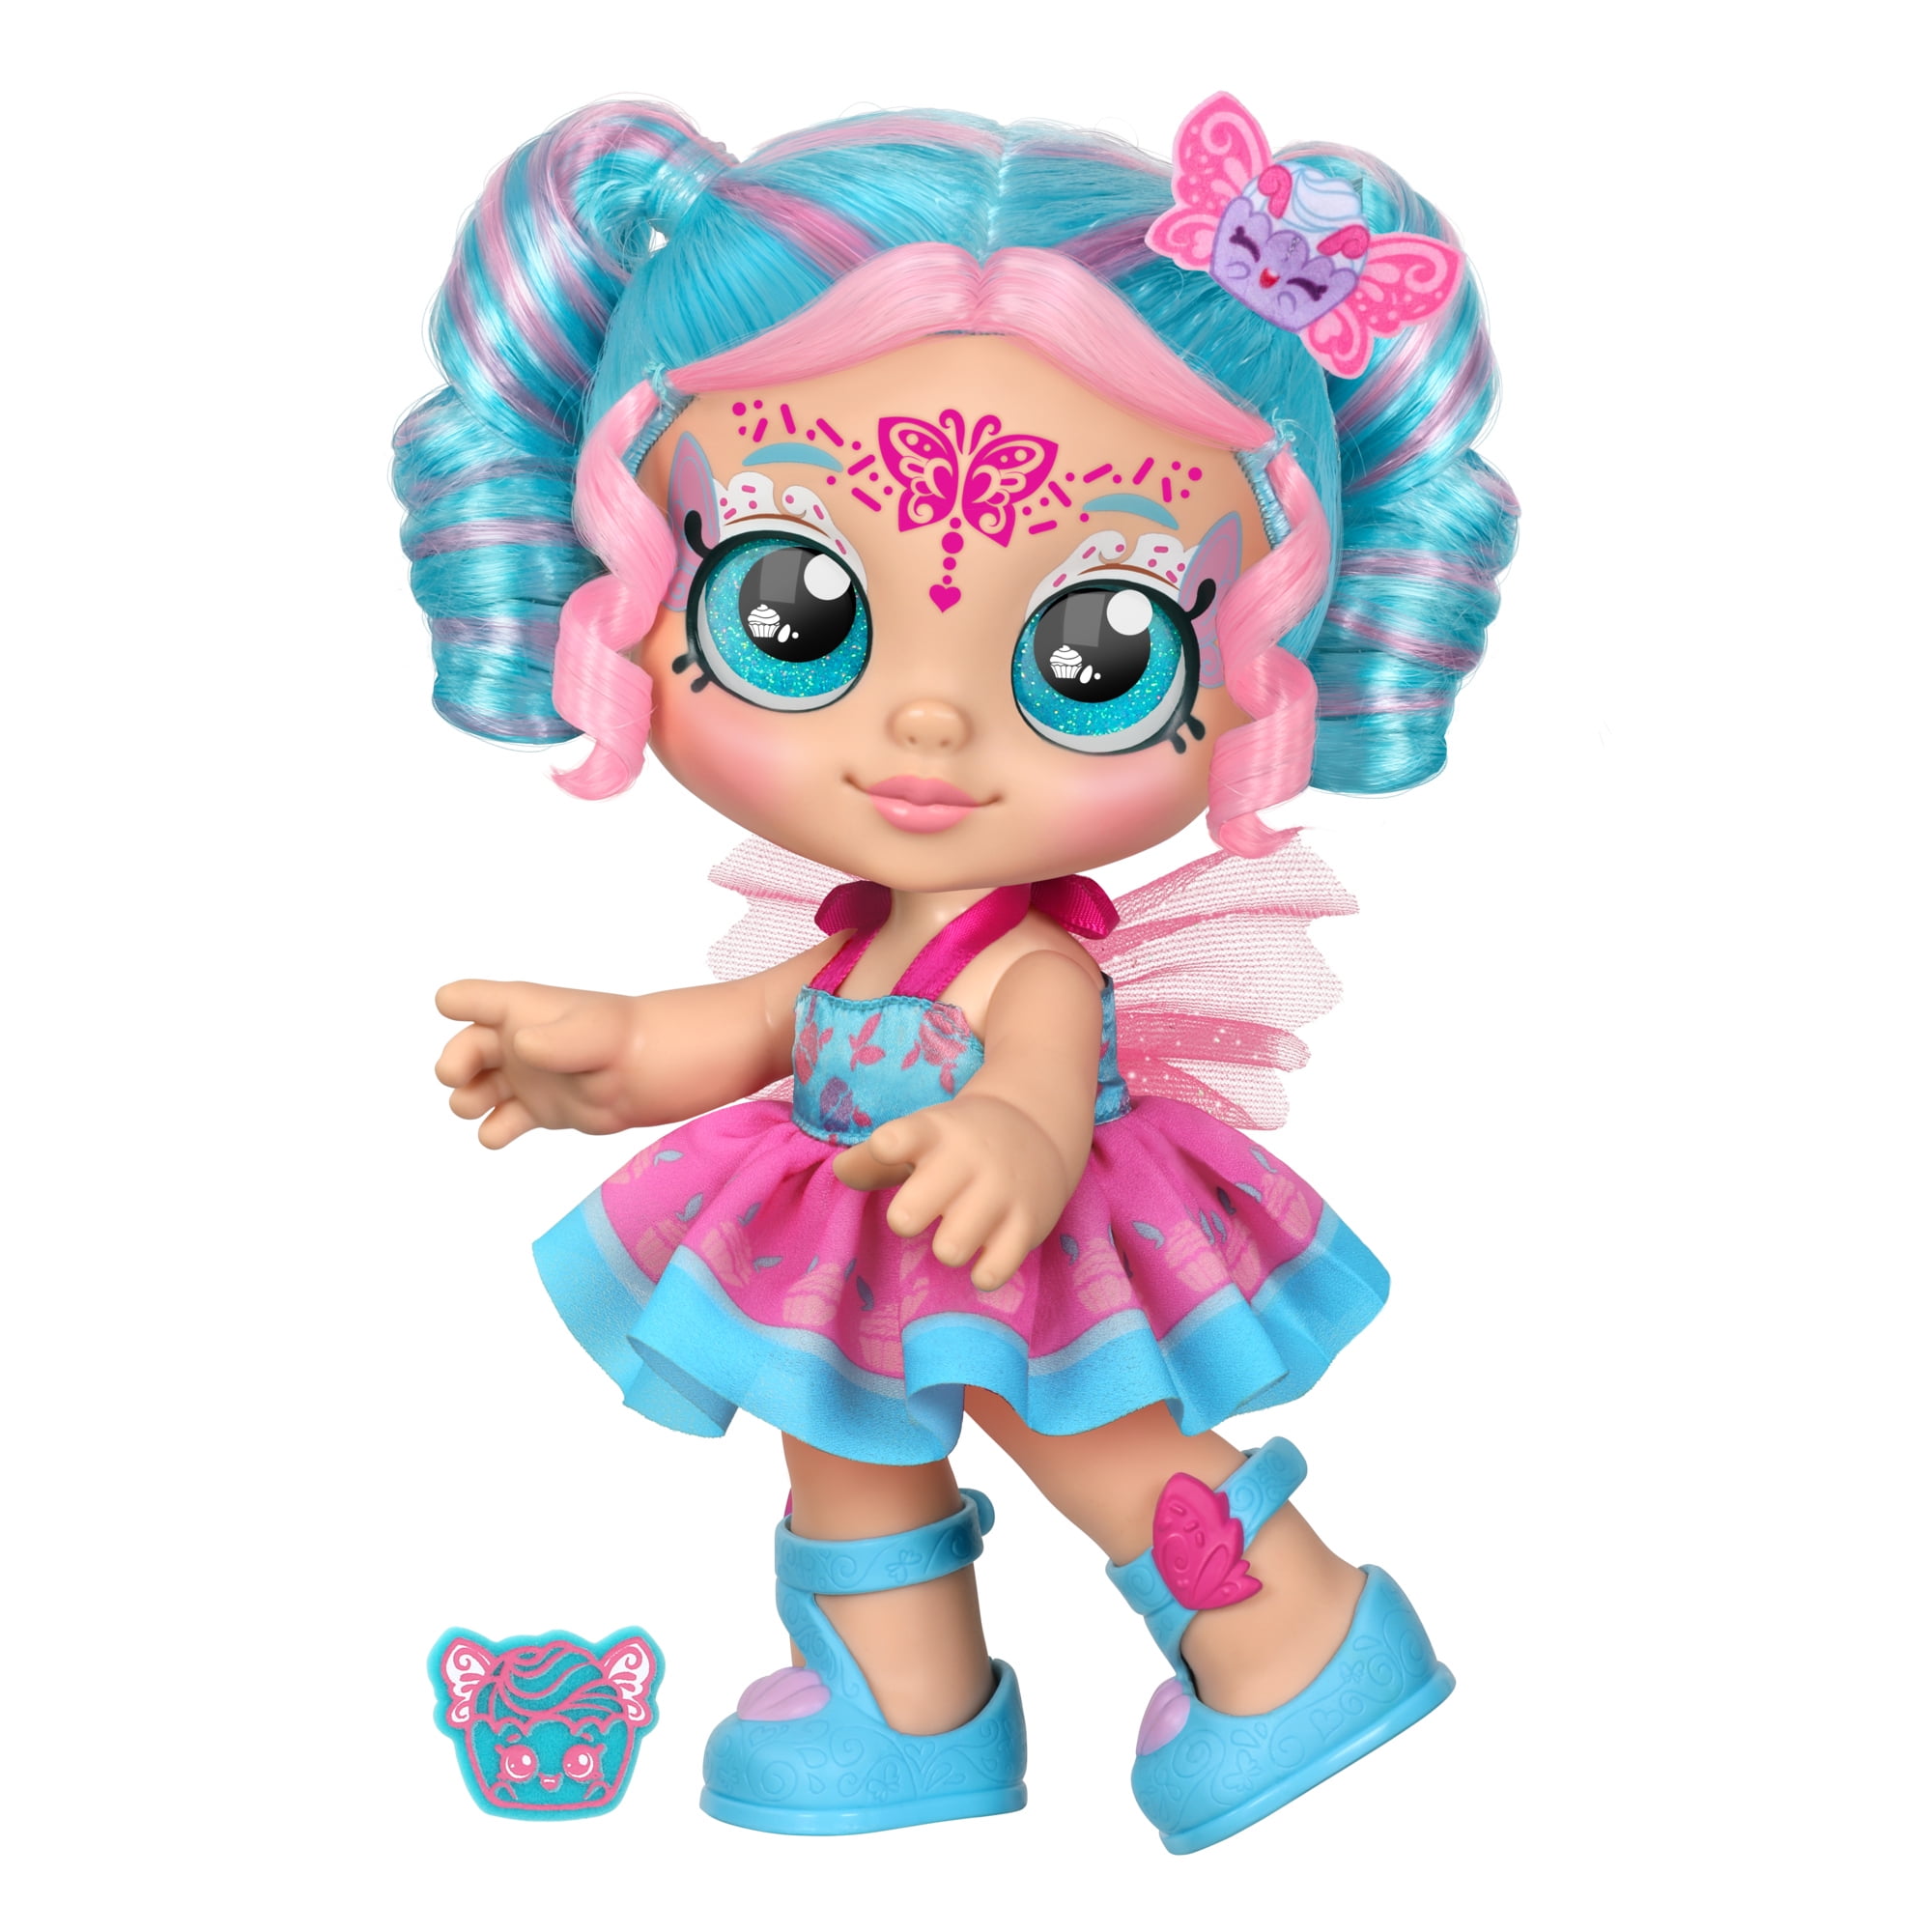 Kindi Kids Dress Up Magic Jessicake Fairy Toddler Doll with Face Paint Reveal, Ages 3+